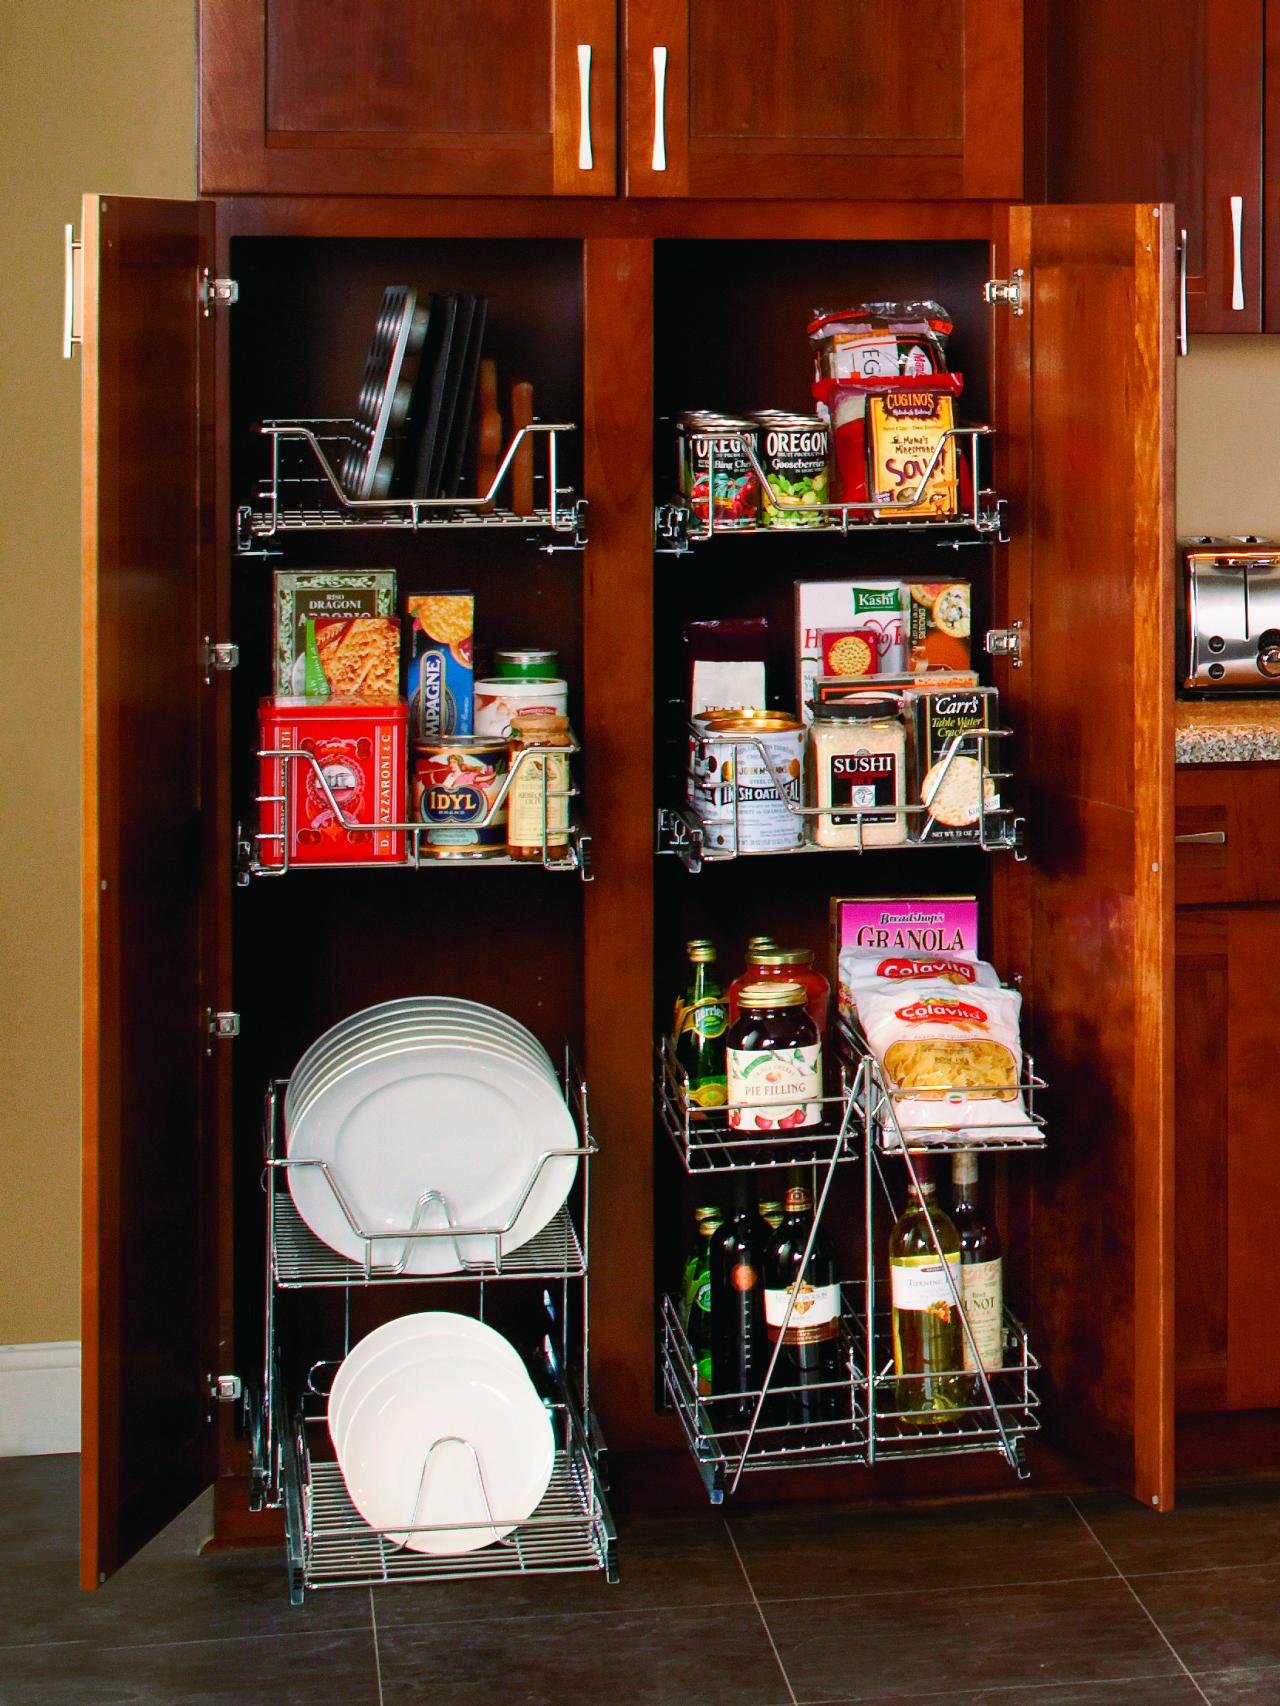 Pullout wire organizers grant easy access to food and dishes.